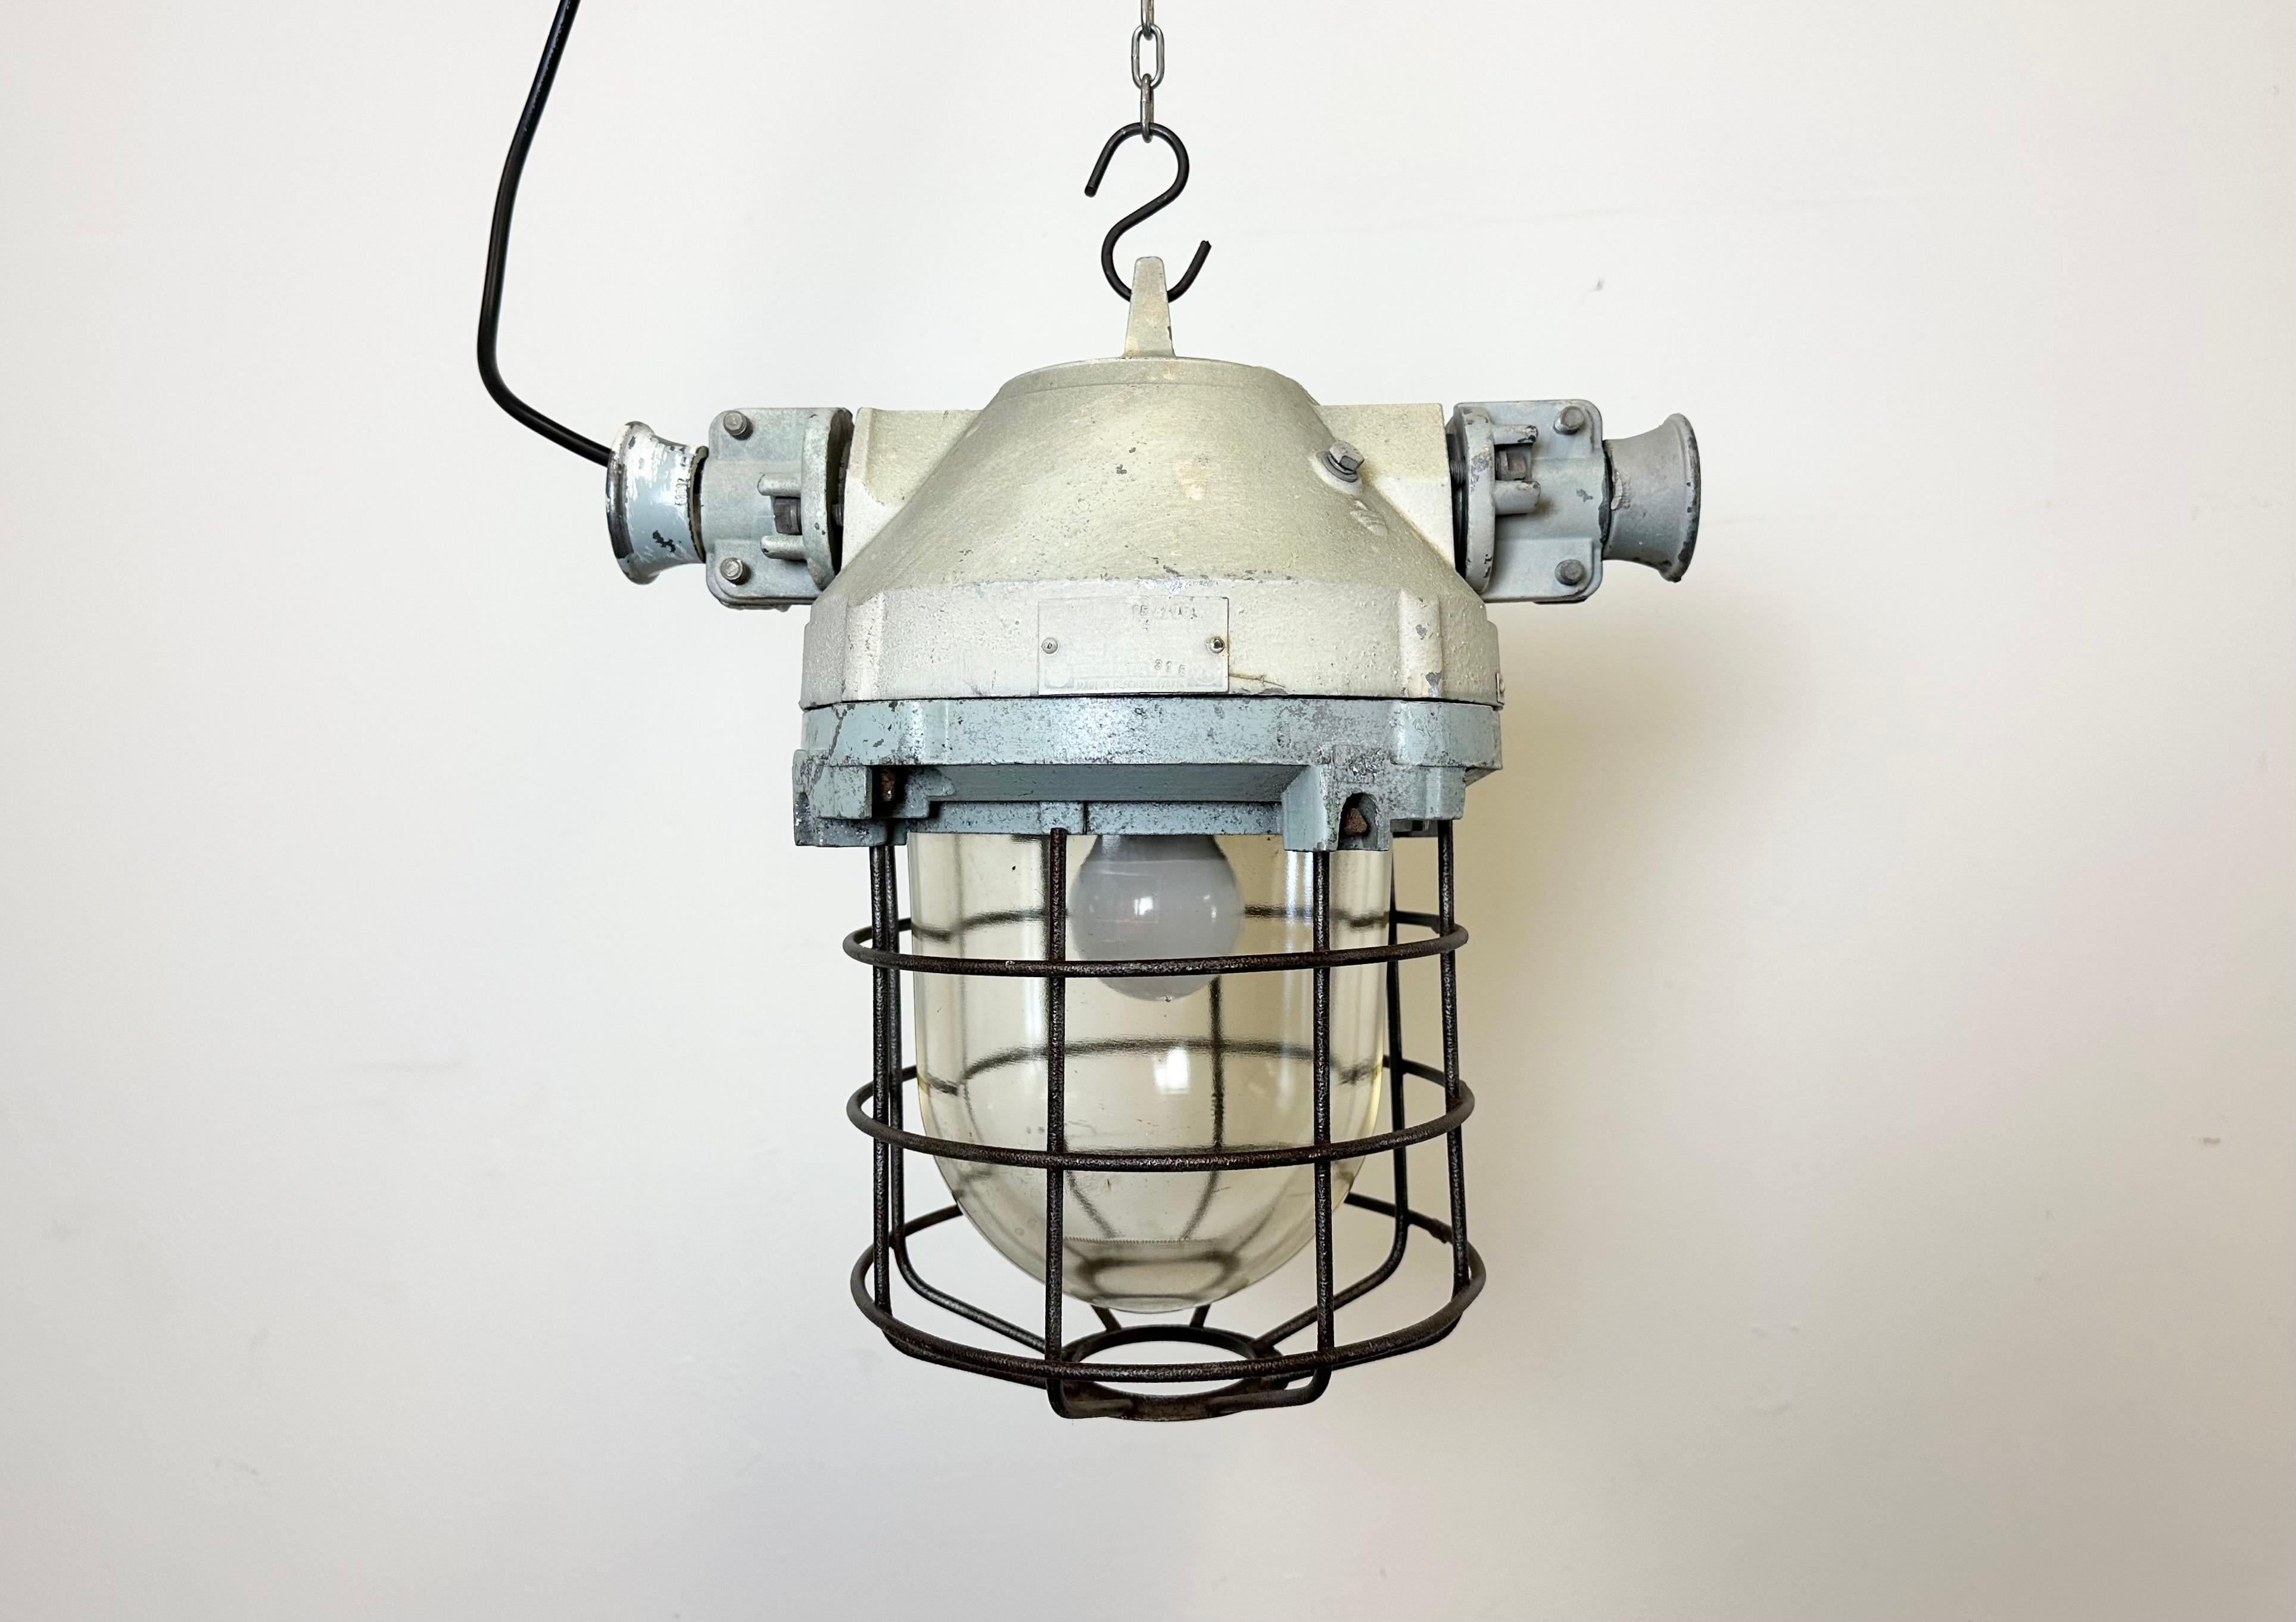 Industrial factory light manufactured by Elektrosvit in former Czechoslovakia during the 1970s. It features a cast aluminium body, an iron cage and explosion-proof glass.
The socket requires standard E27 / E 26 lightbulbs. New wire. The weight of